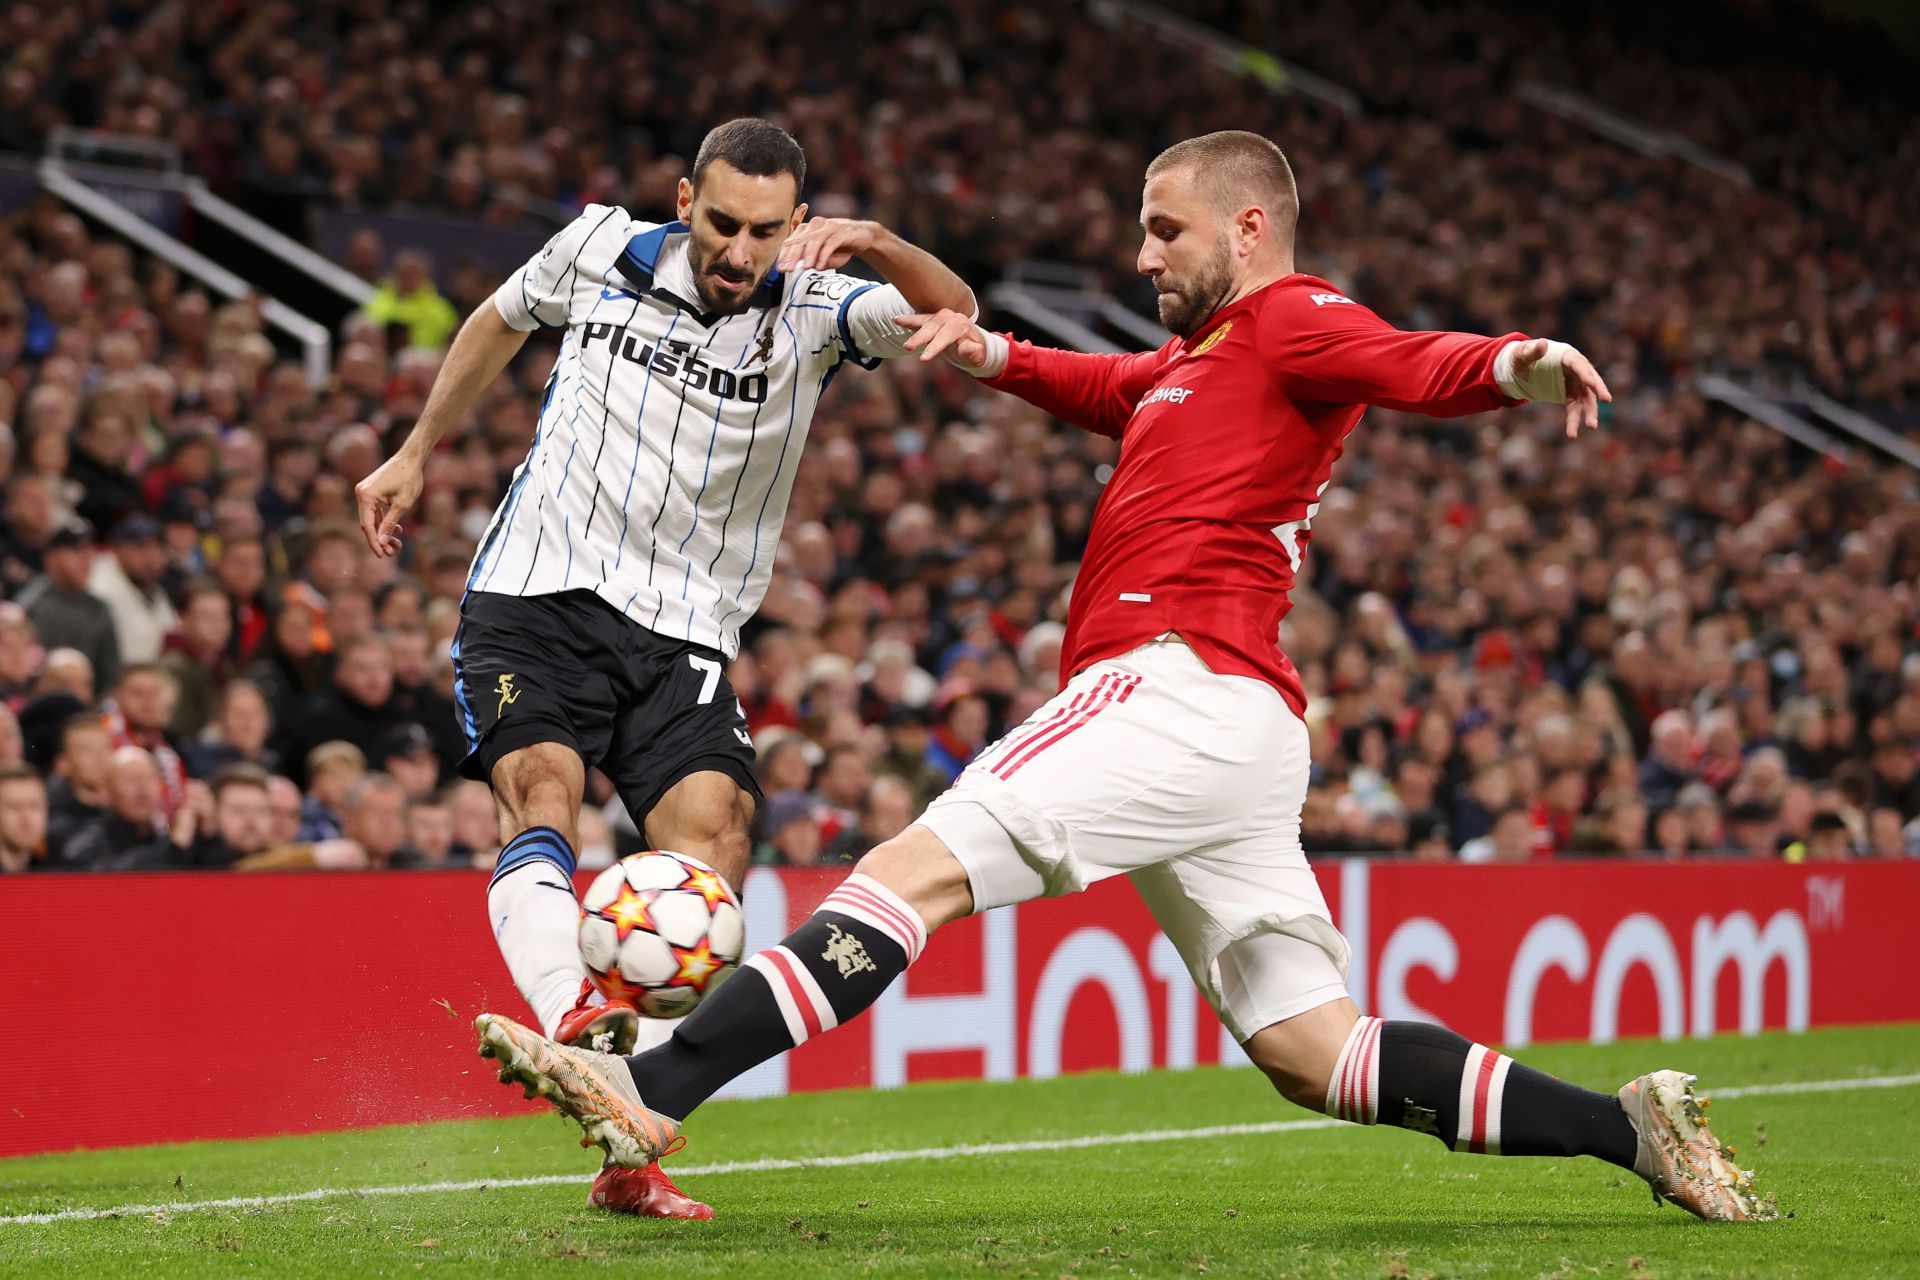 Luke Shaw has impressed with his pace and work rate this season.